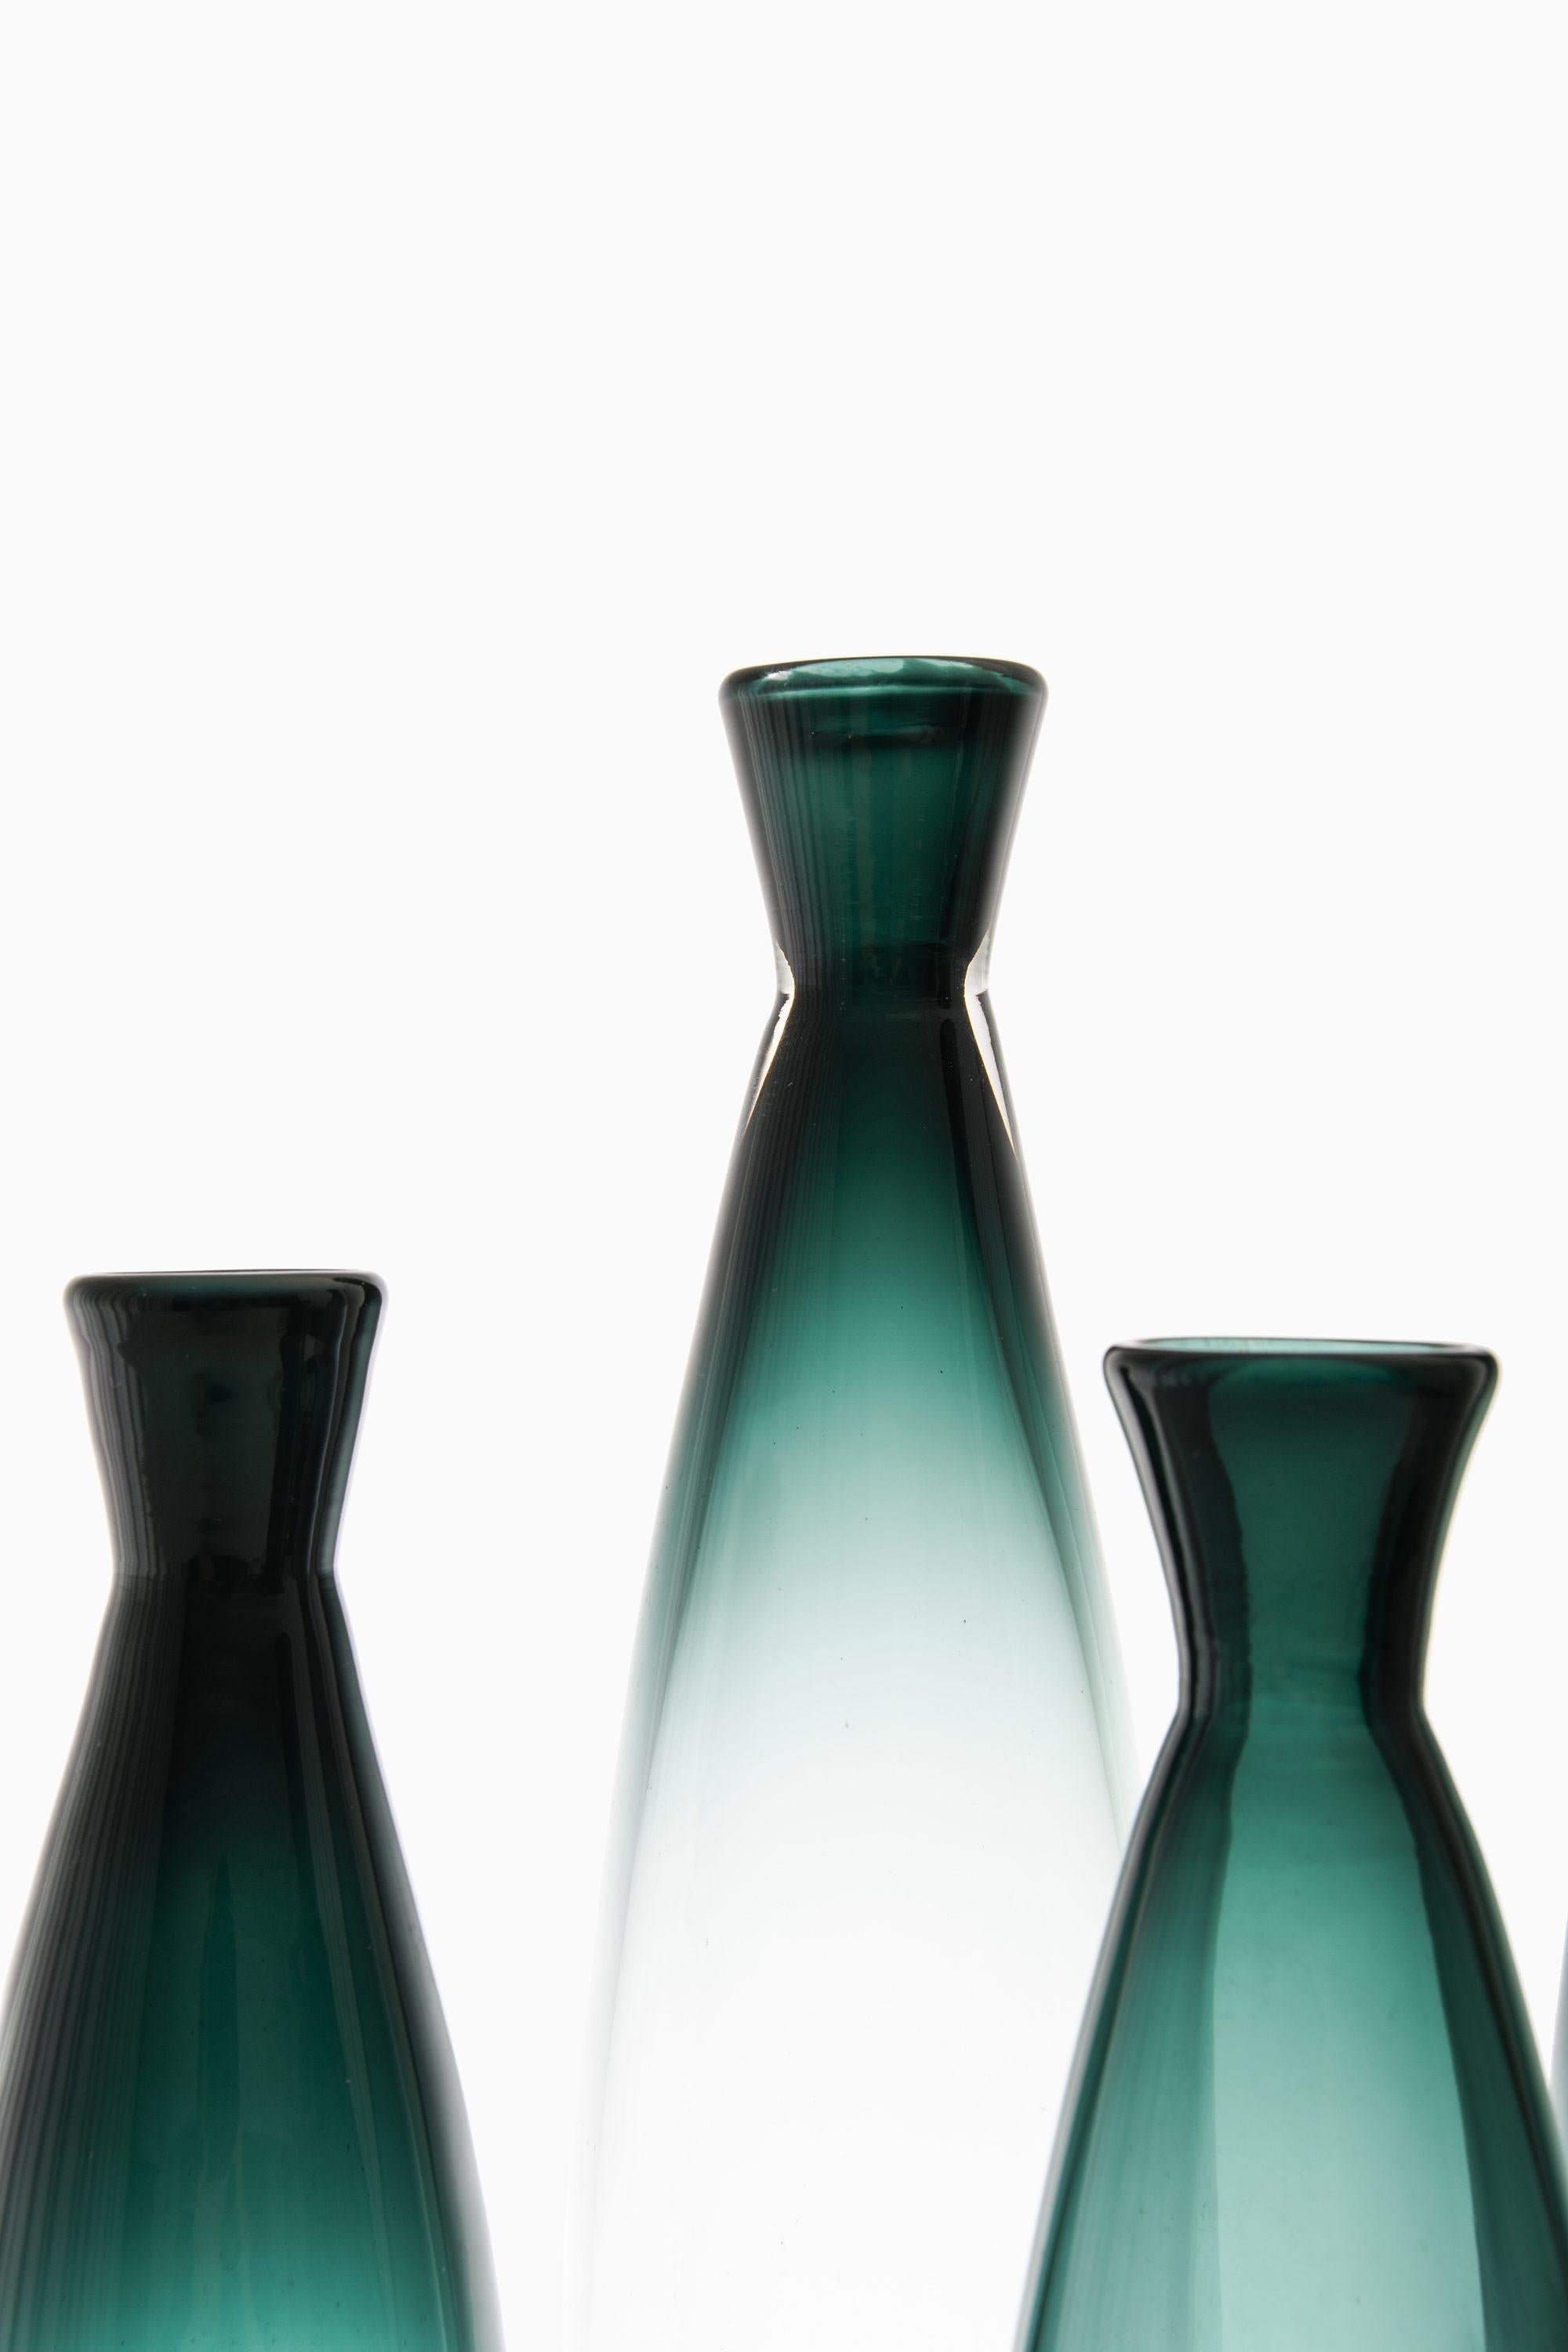 Set of 4 Glass Vases by Bengt Orup, 1960’s

Additional Information:
Material: Glass
Style: Mid century, Scandinavian
Produced by Johansfors in Sweden
Dimensions (W x D x H): 8.5 x 8.5 x 37 cm
Dimensions (W x D x H): 7.5 x 7.5 x 28 cm
Condition: Good